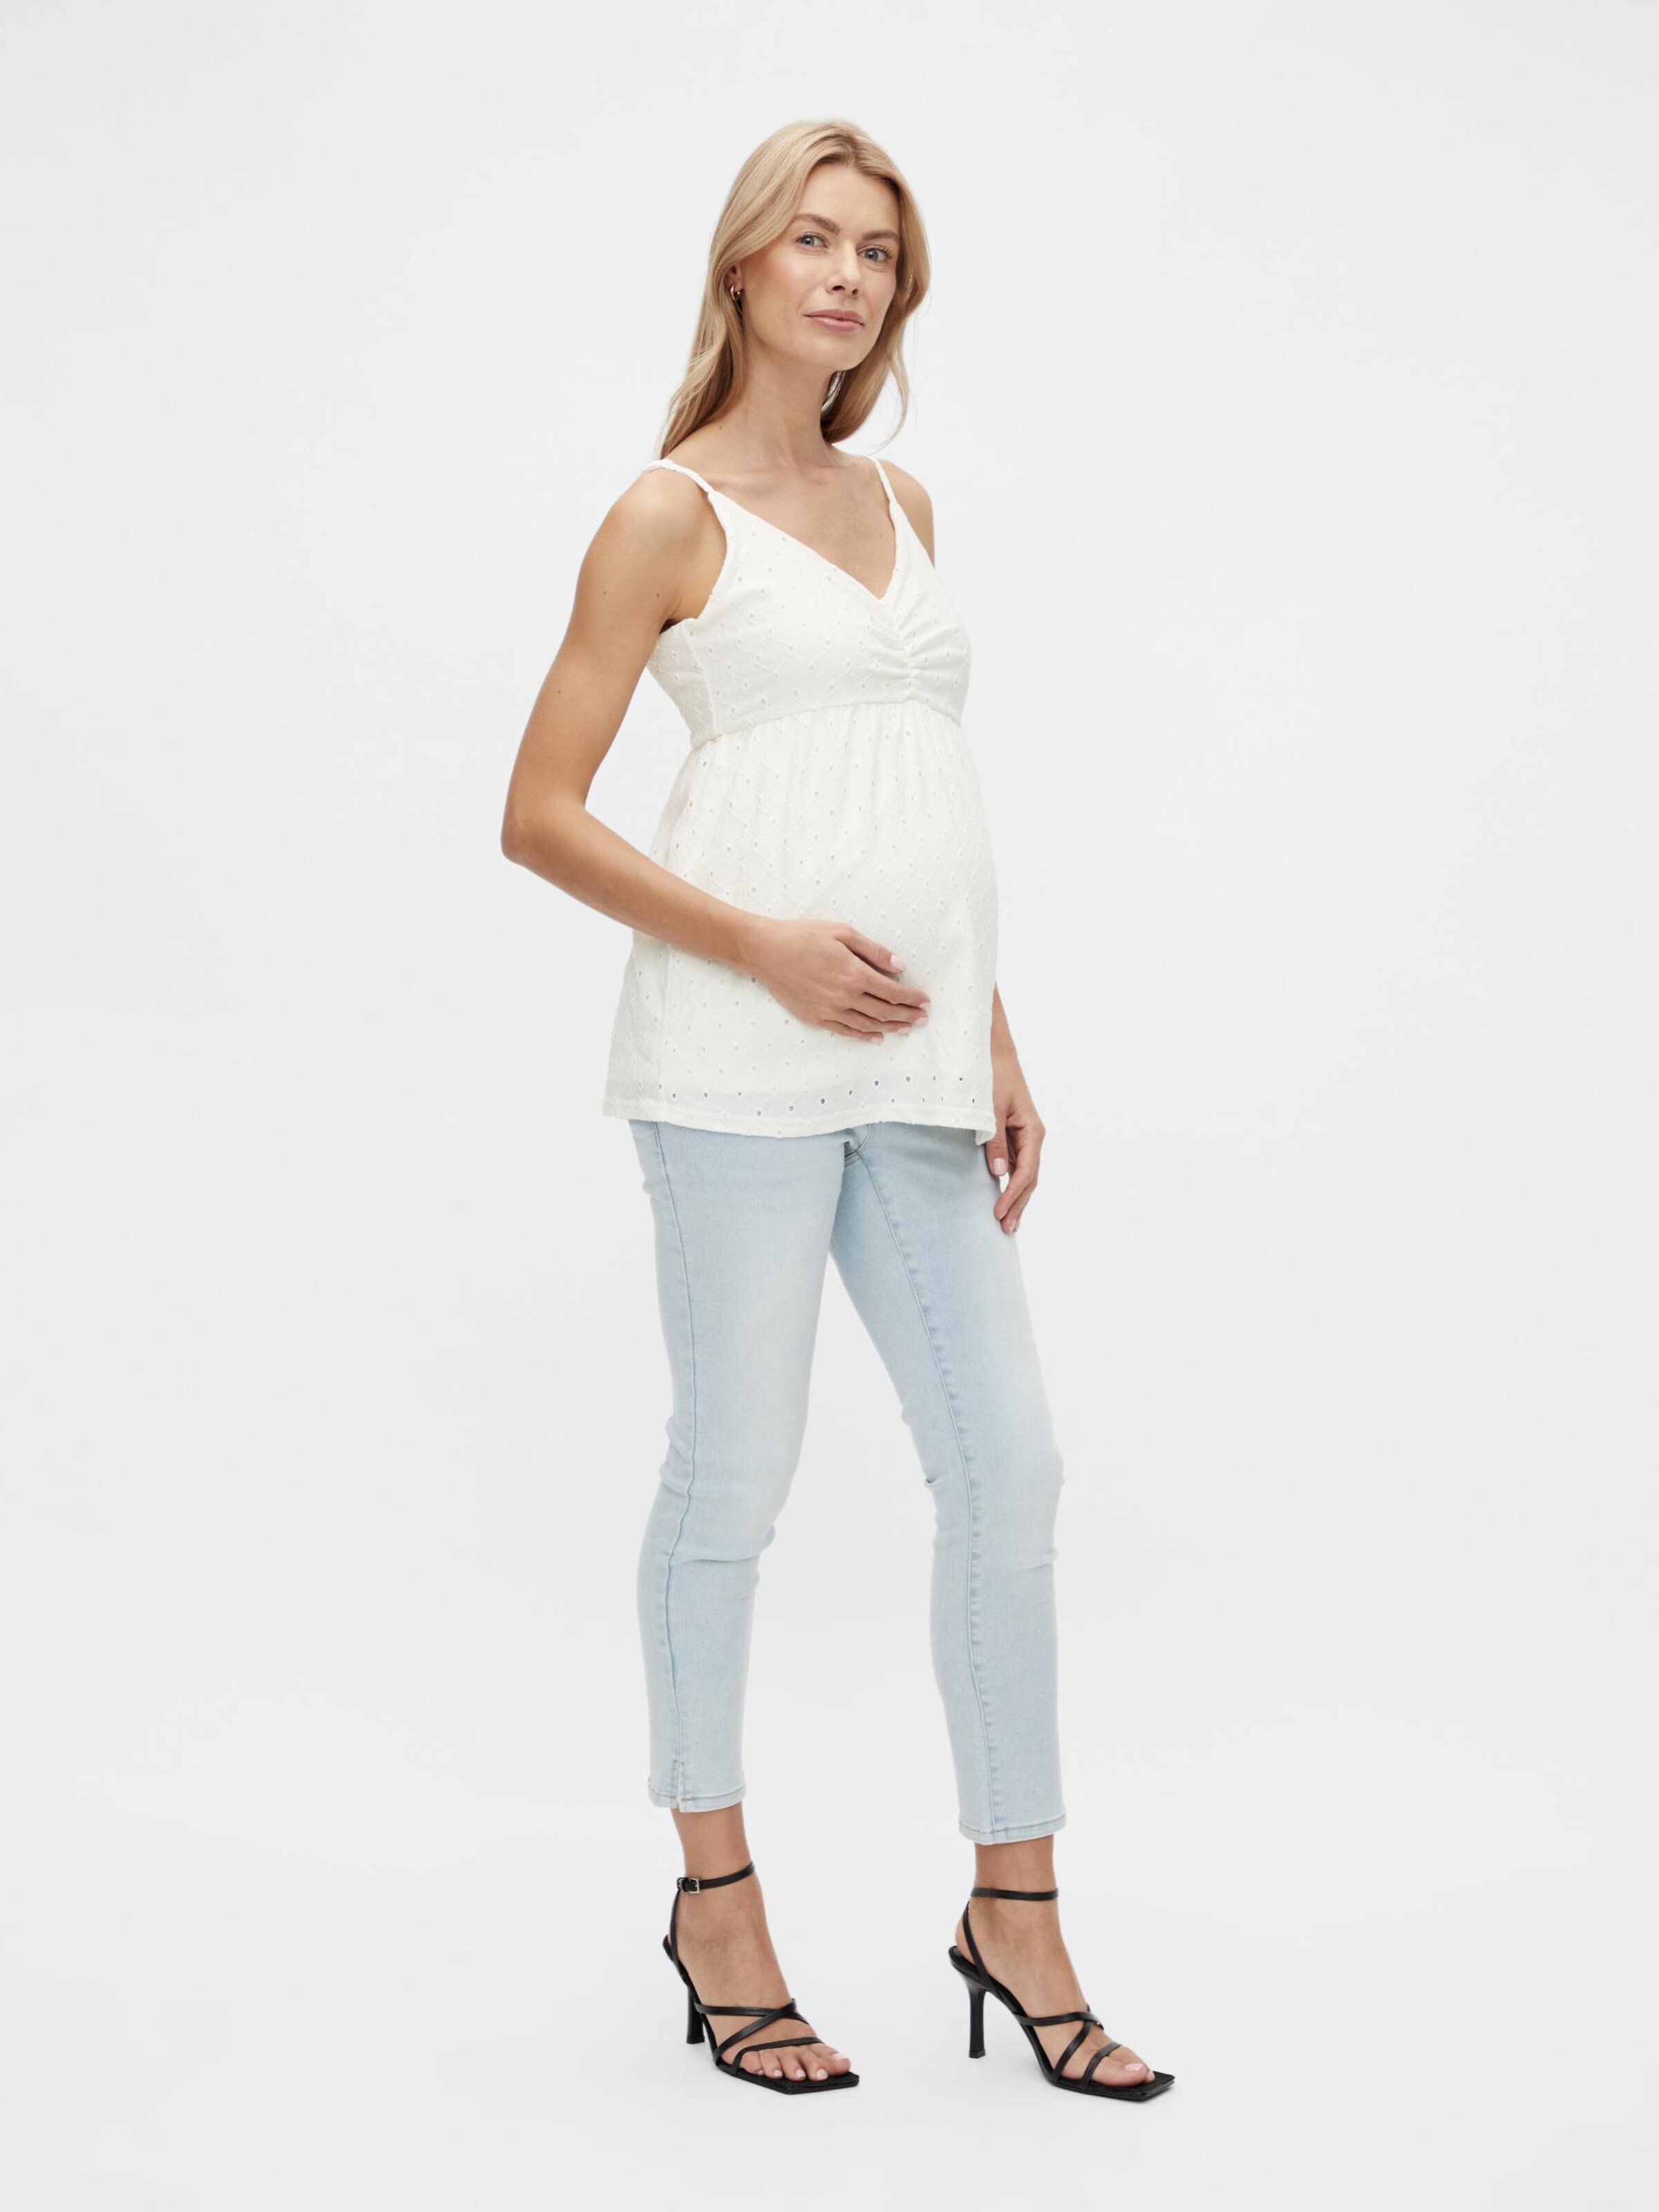 Frauen Shirts & Tops MAMALICIOUS Top 'Benedicte' in Offwhite - LB02631